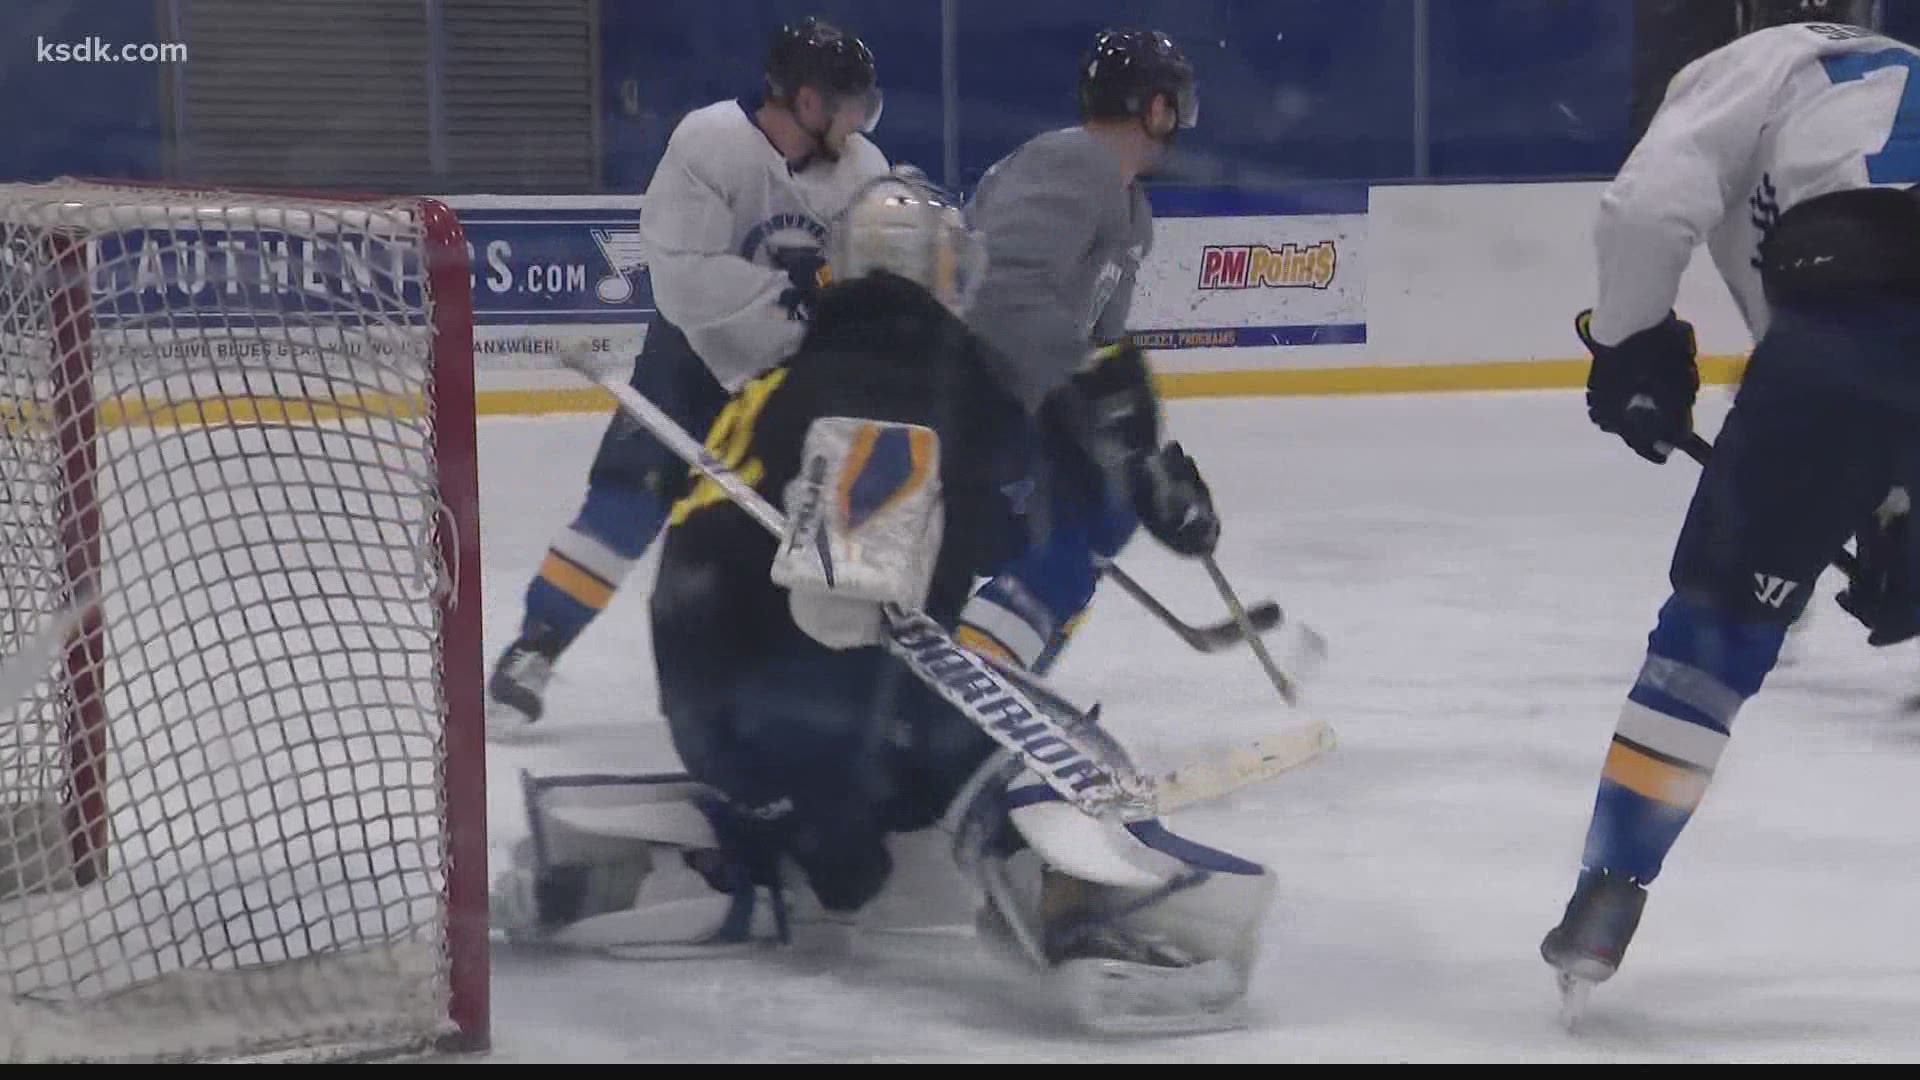 The Blues are back on the ice for 2021